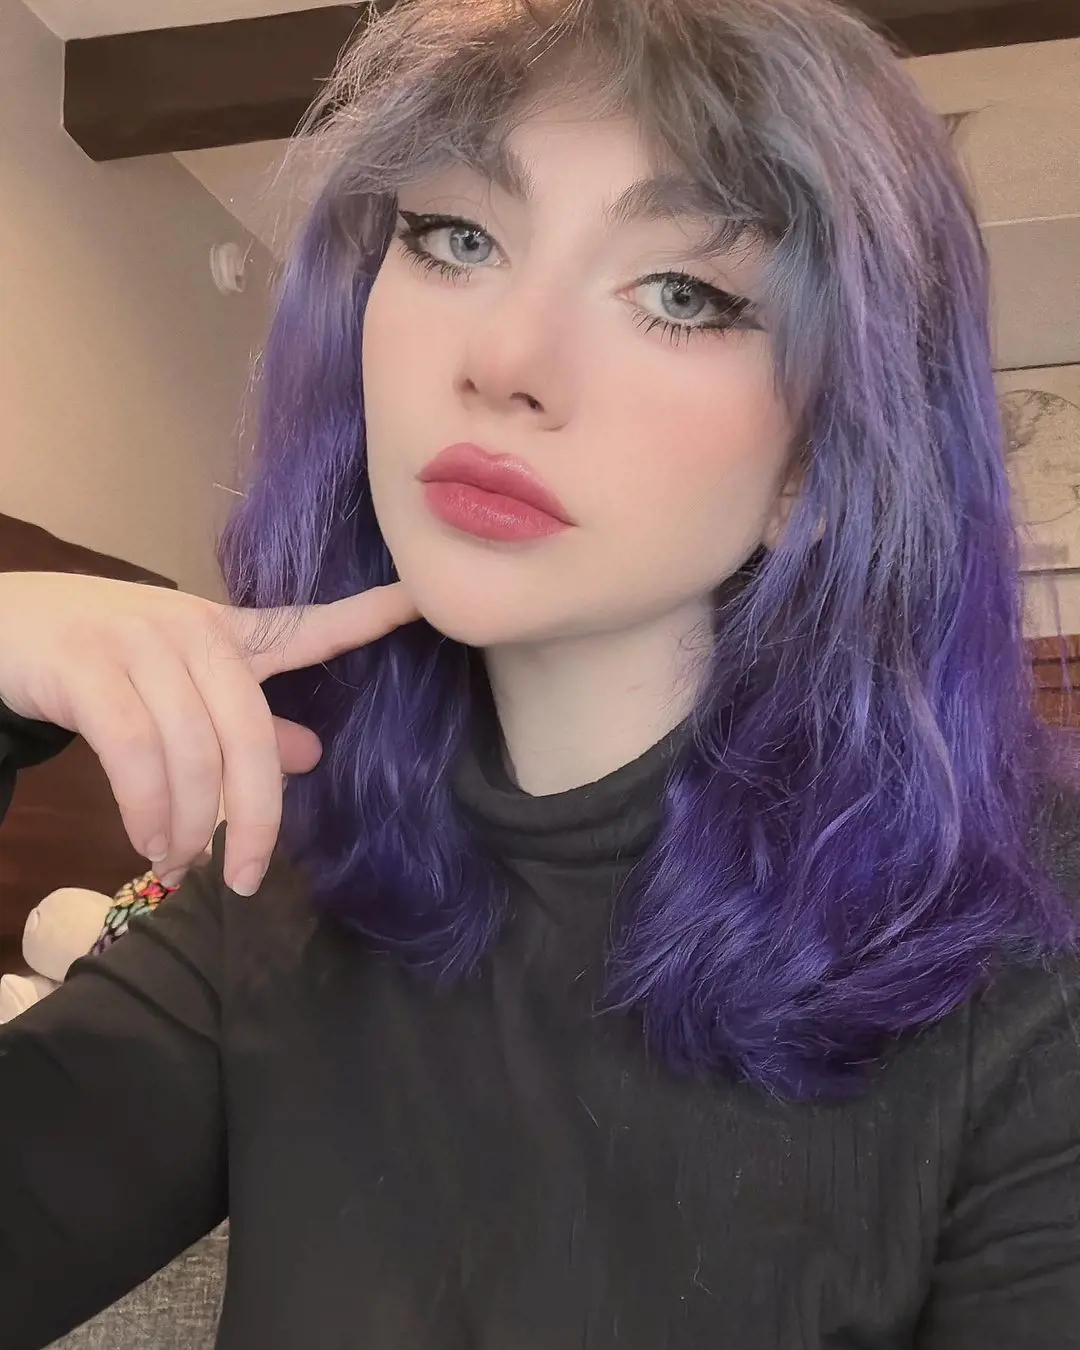 Justaminx at 27 hooking up 17 year olds together on tiktok live :  r/twitchdrama